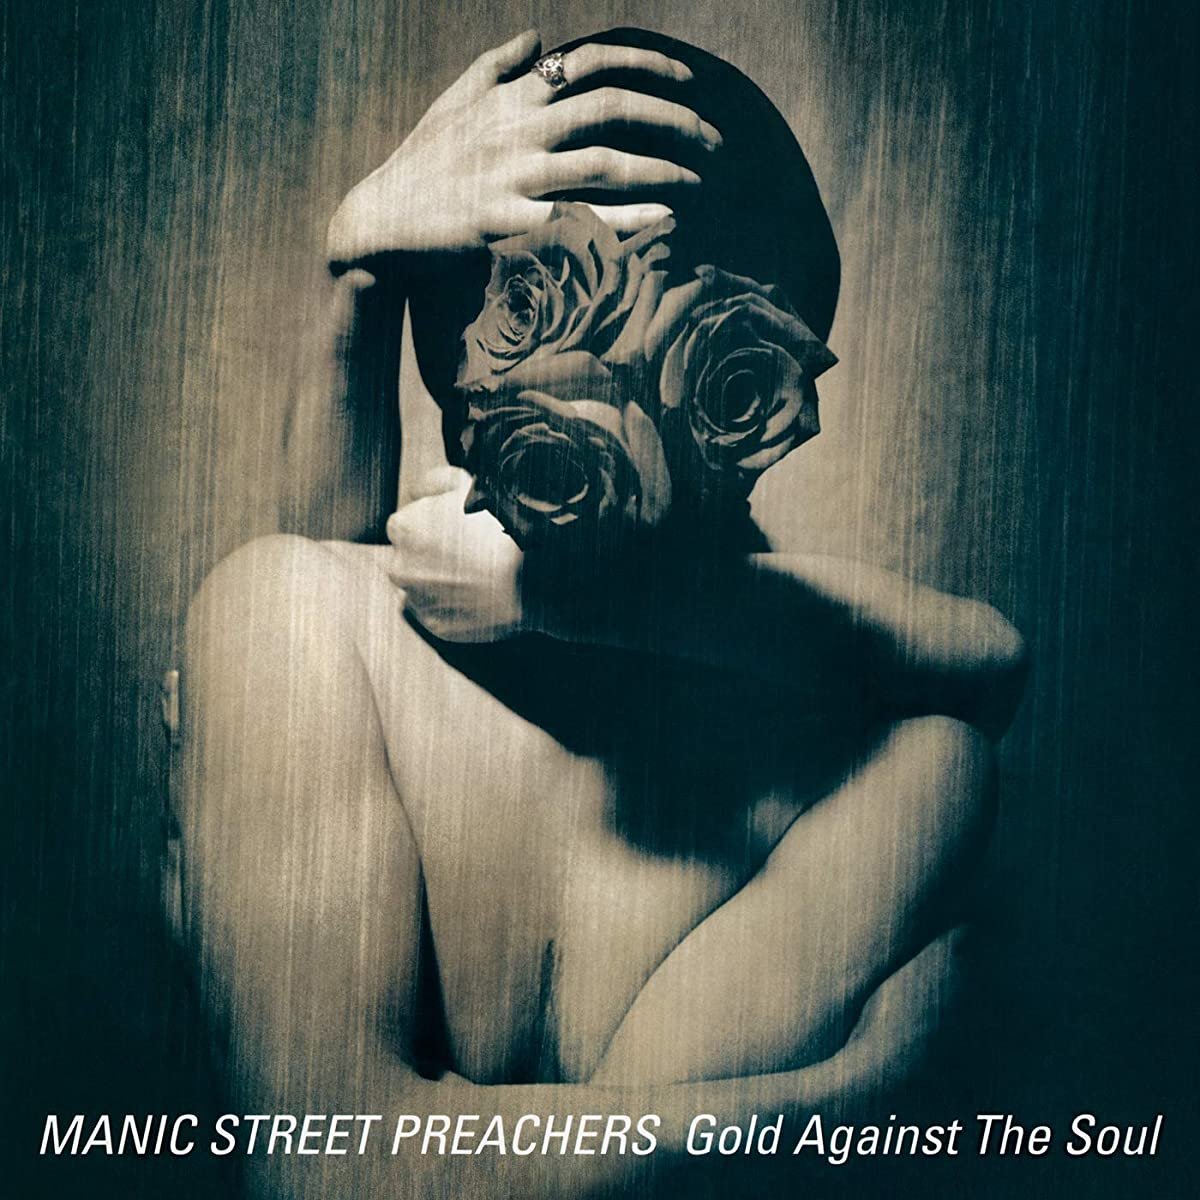 Manic Street Preachers-Gold Against the Soul-REMASTERED-16BIT-WEB-FLAC-2020-ENRiCH Download